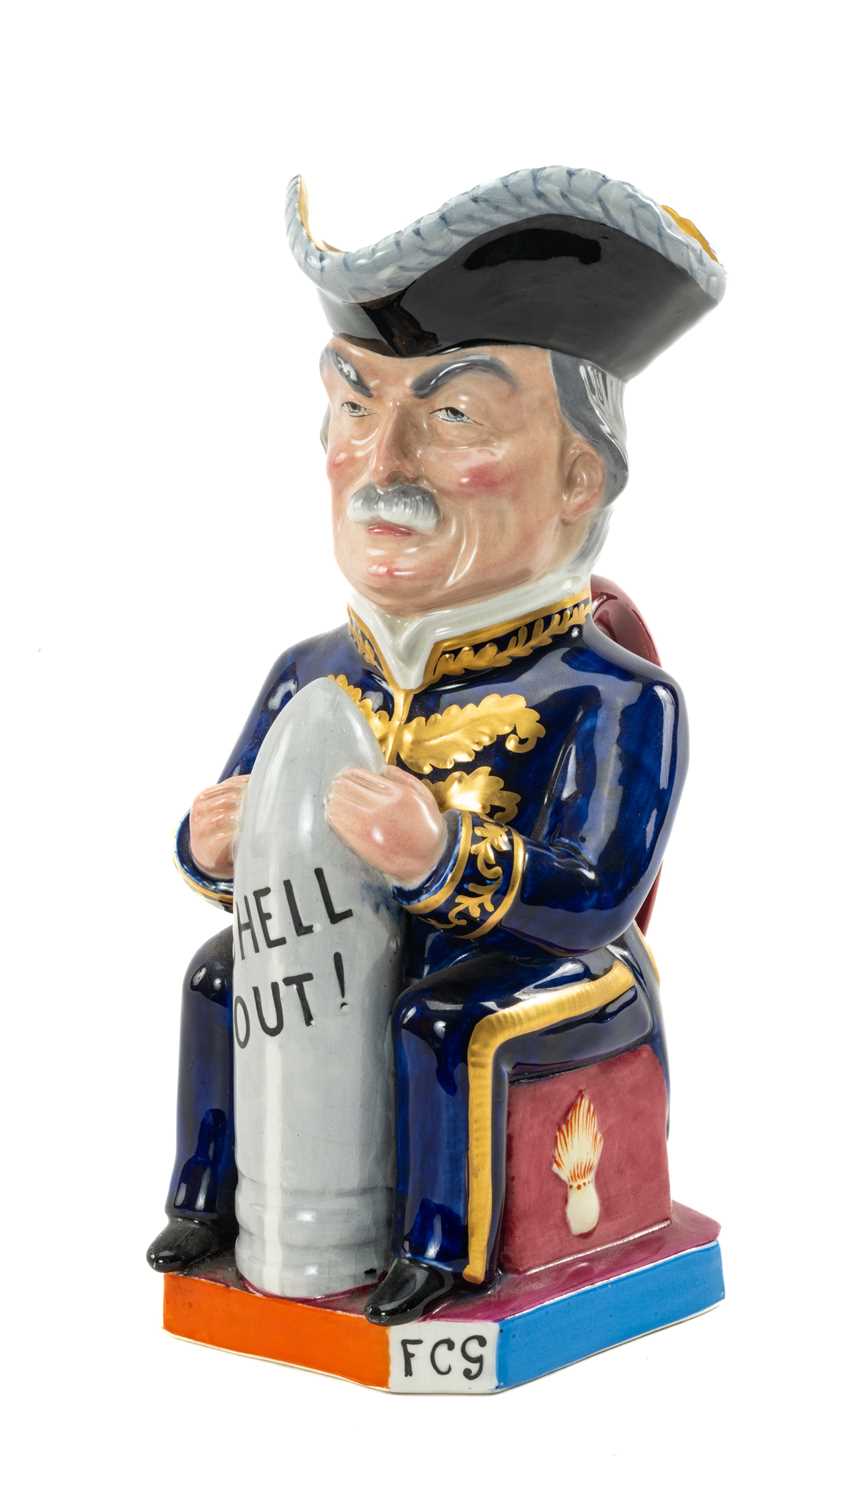 WILKINSON TOBY JUG designed by Sir Francis Carruthers Gould depicting the Right Honourable David